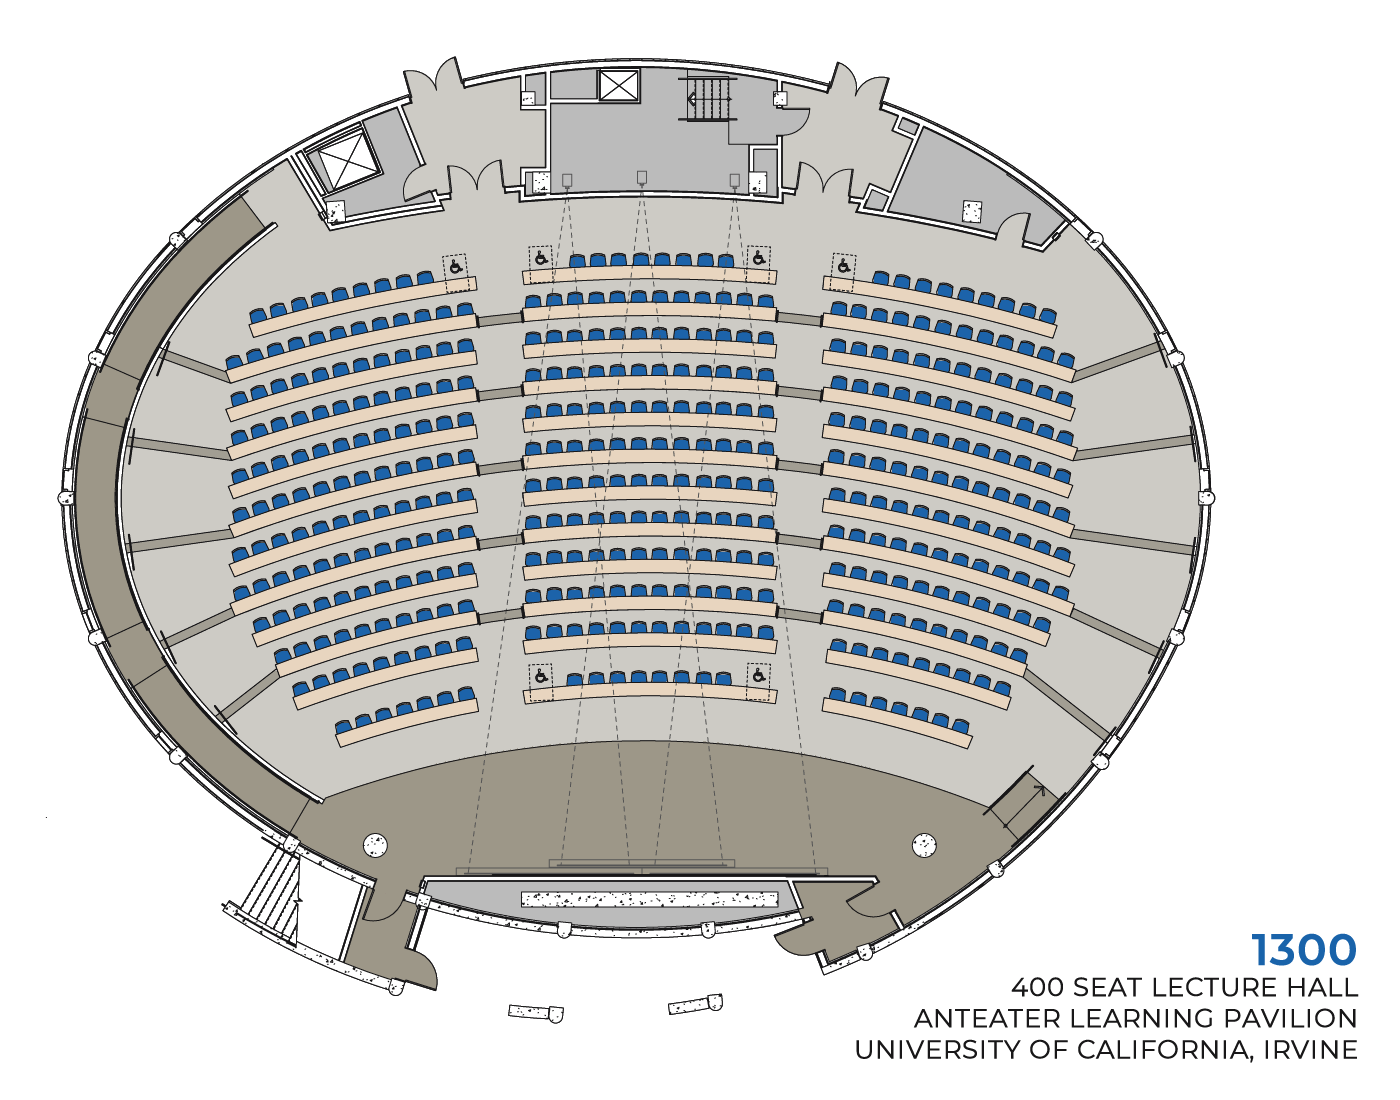 ALP 1300 - 400 Seat Lecture Hall